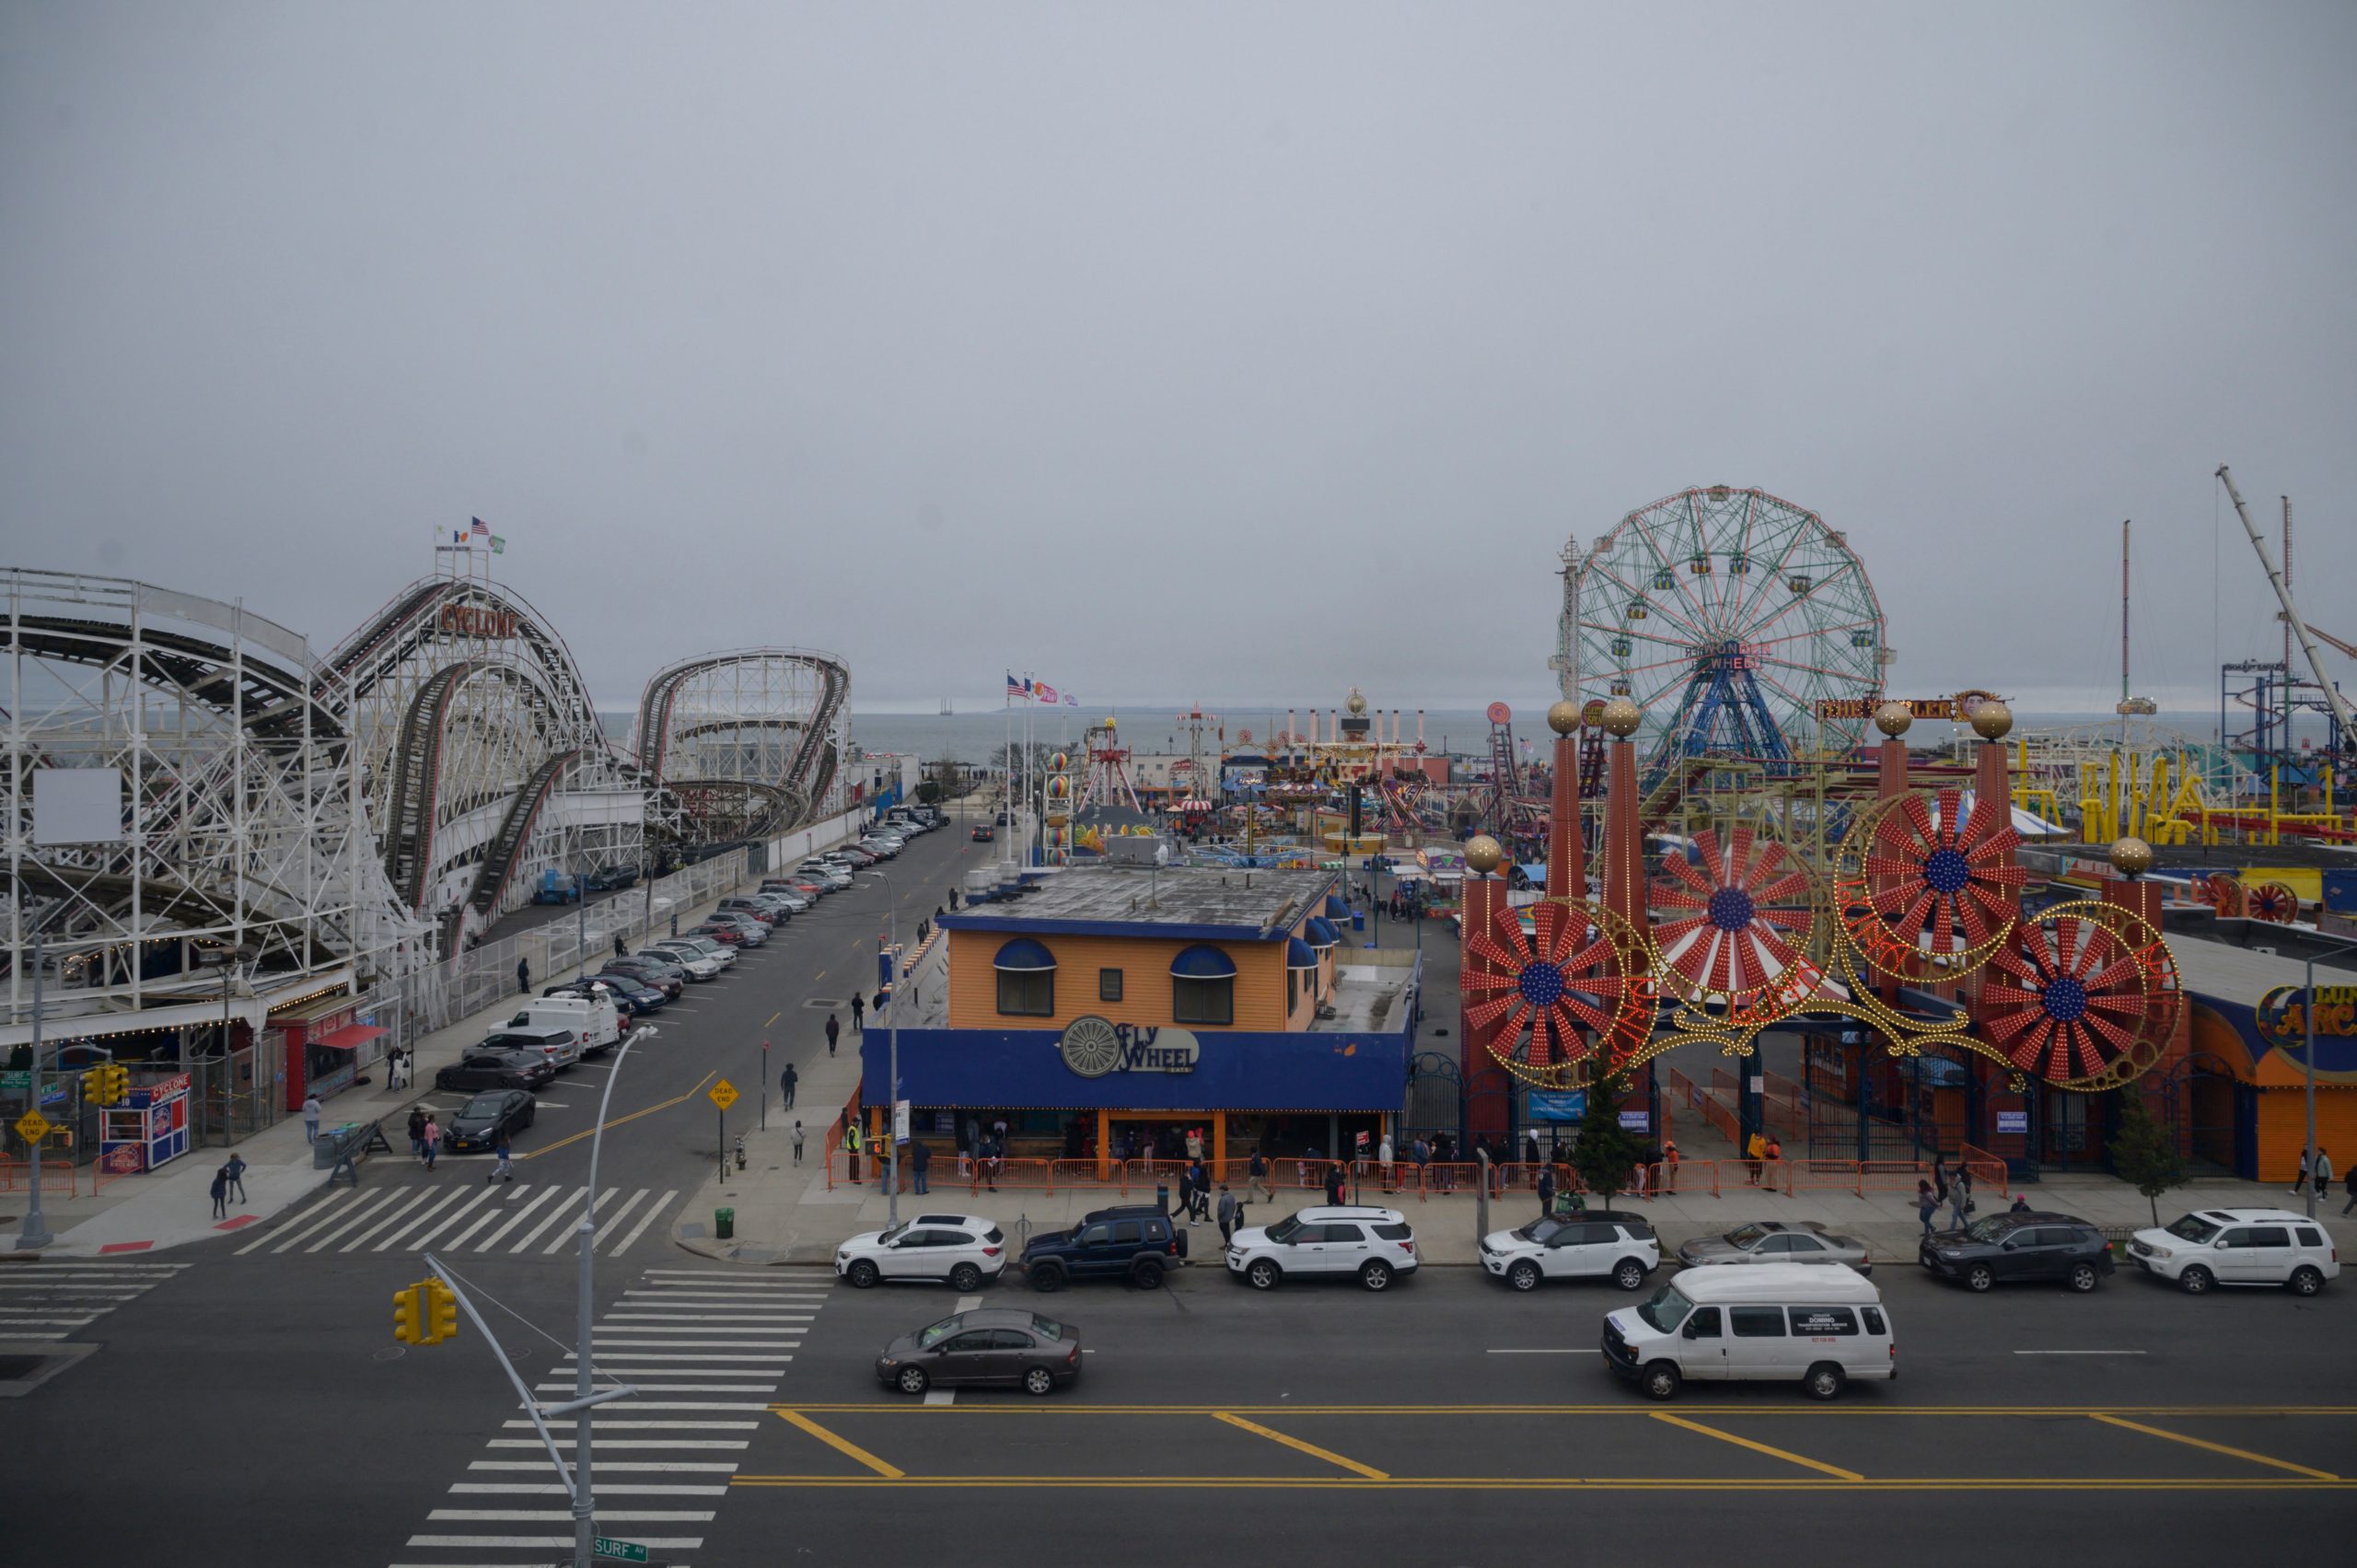 Visitors ride attractions on the opening day of the 2021 season at the Luna Park amusement park in Coney Island, New York on April 9, 2021. (Photo by ED JONES/AFP via Getty Images)